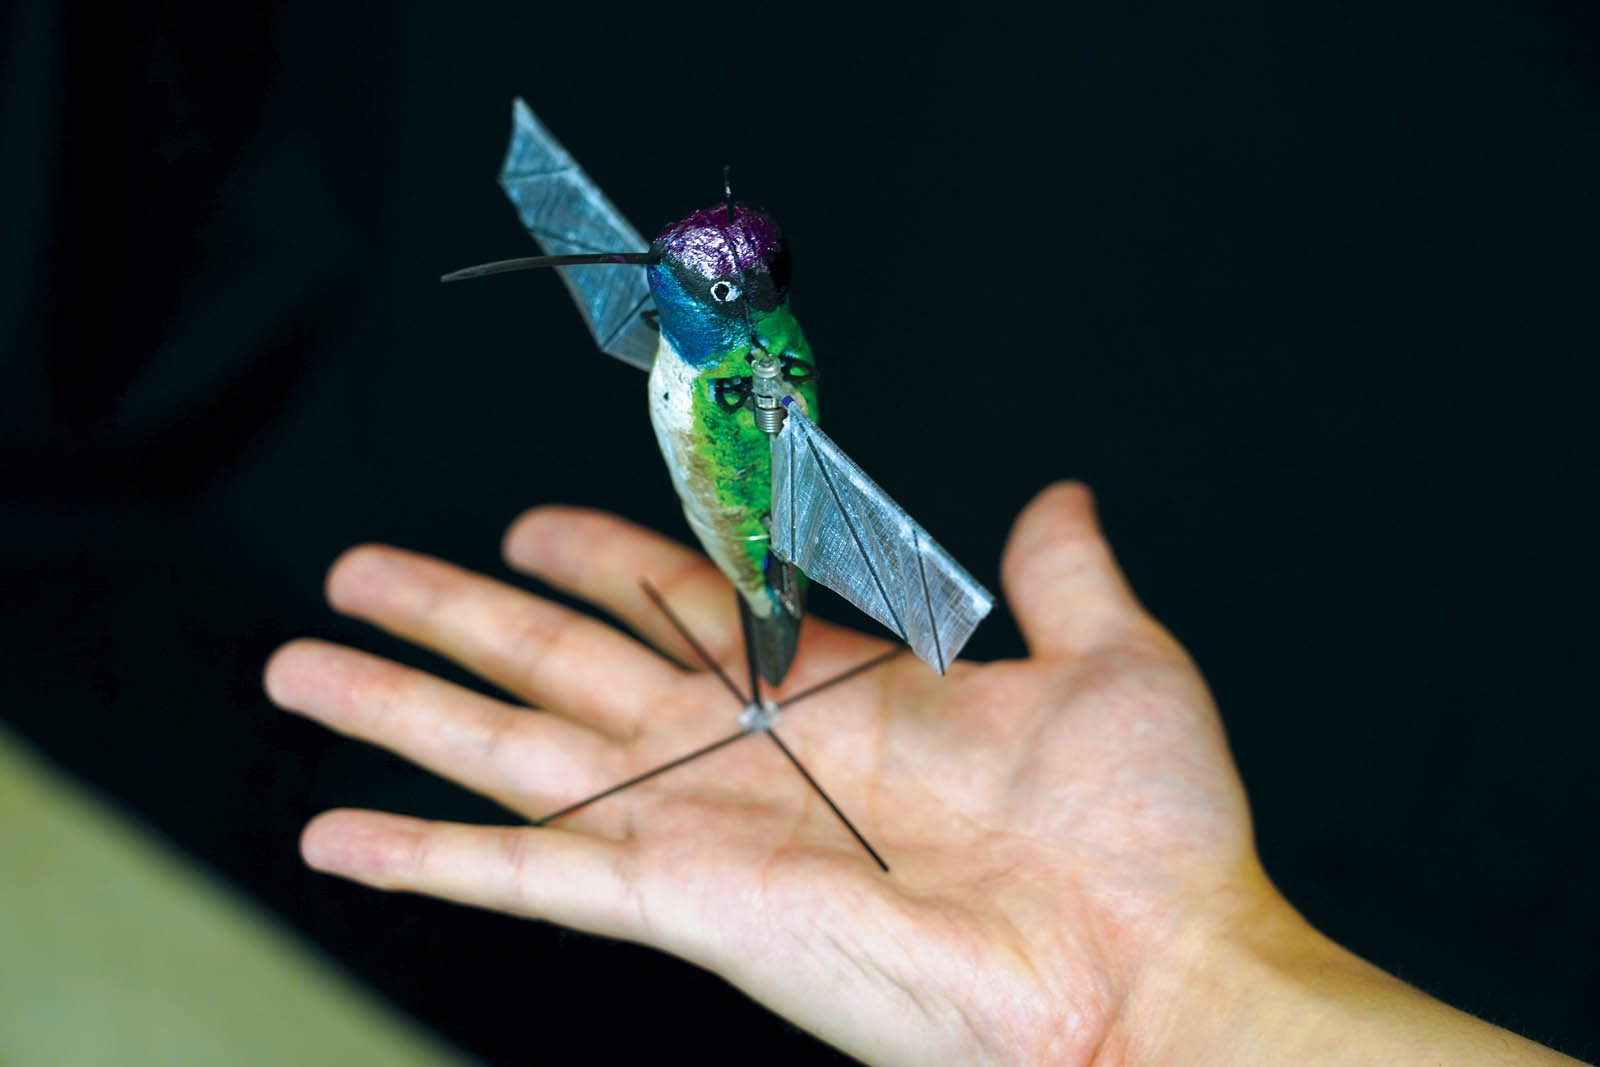 Purdue University researchers are building robotic hummingbirds taught to f...